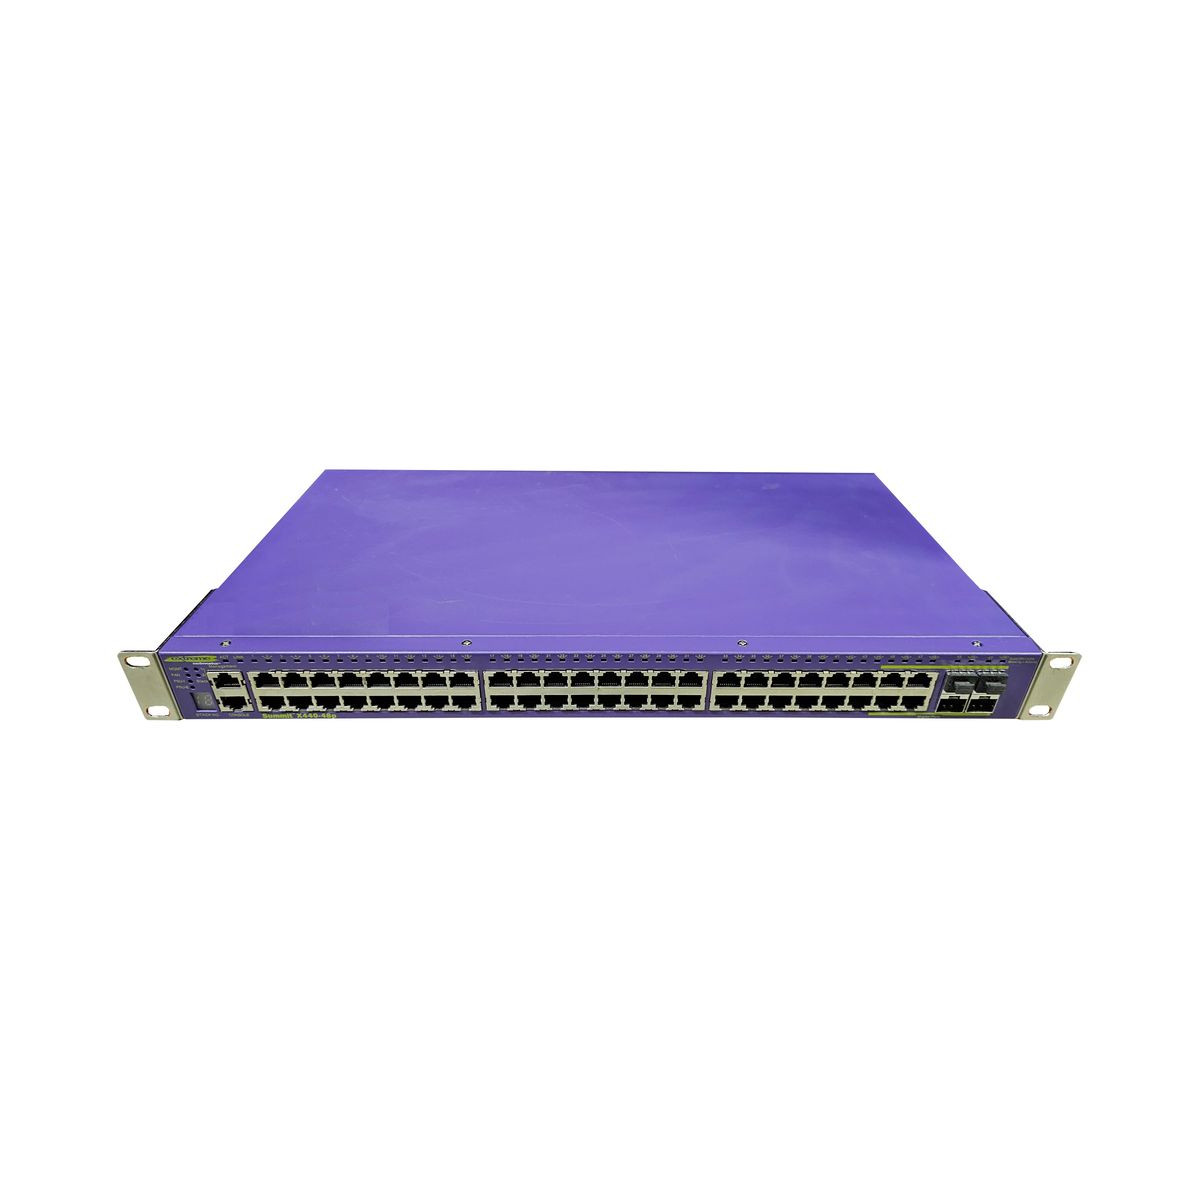 EXTREME NETWORKS X440-48P 48x1GB PoE 4xSFP STACK